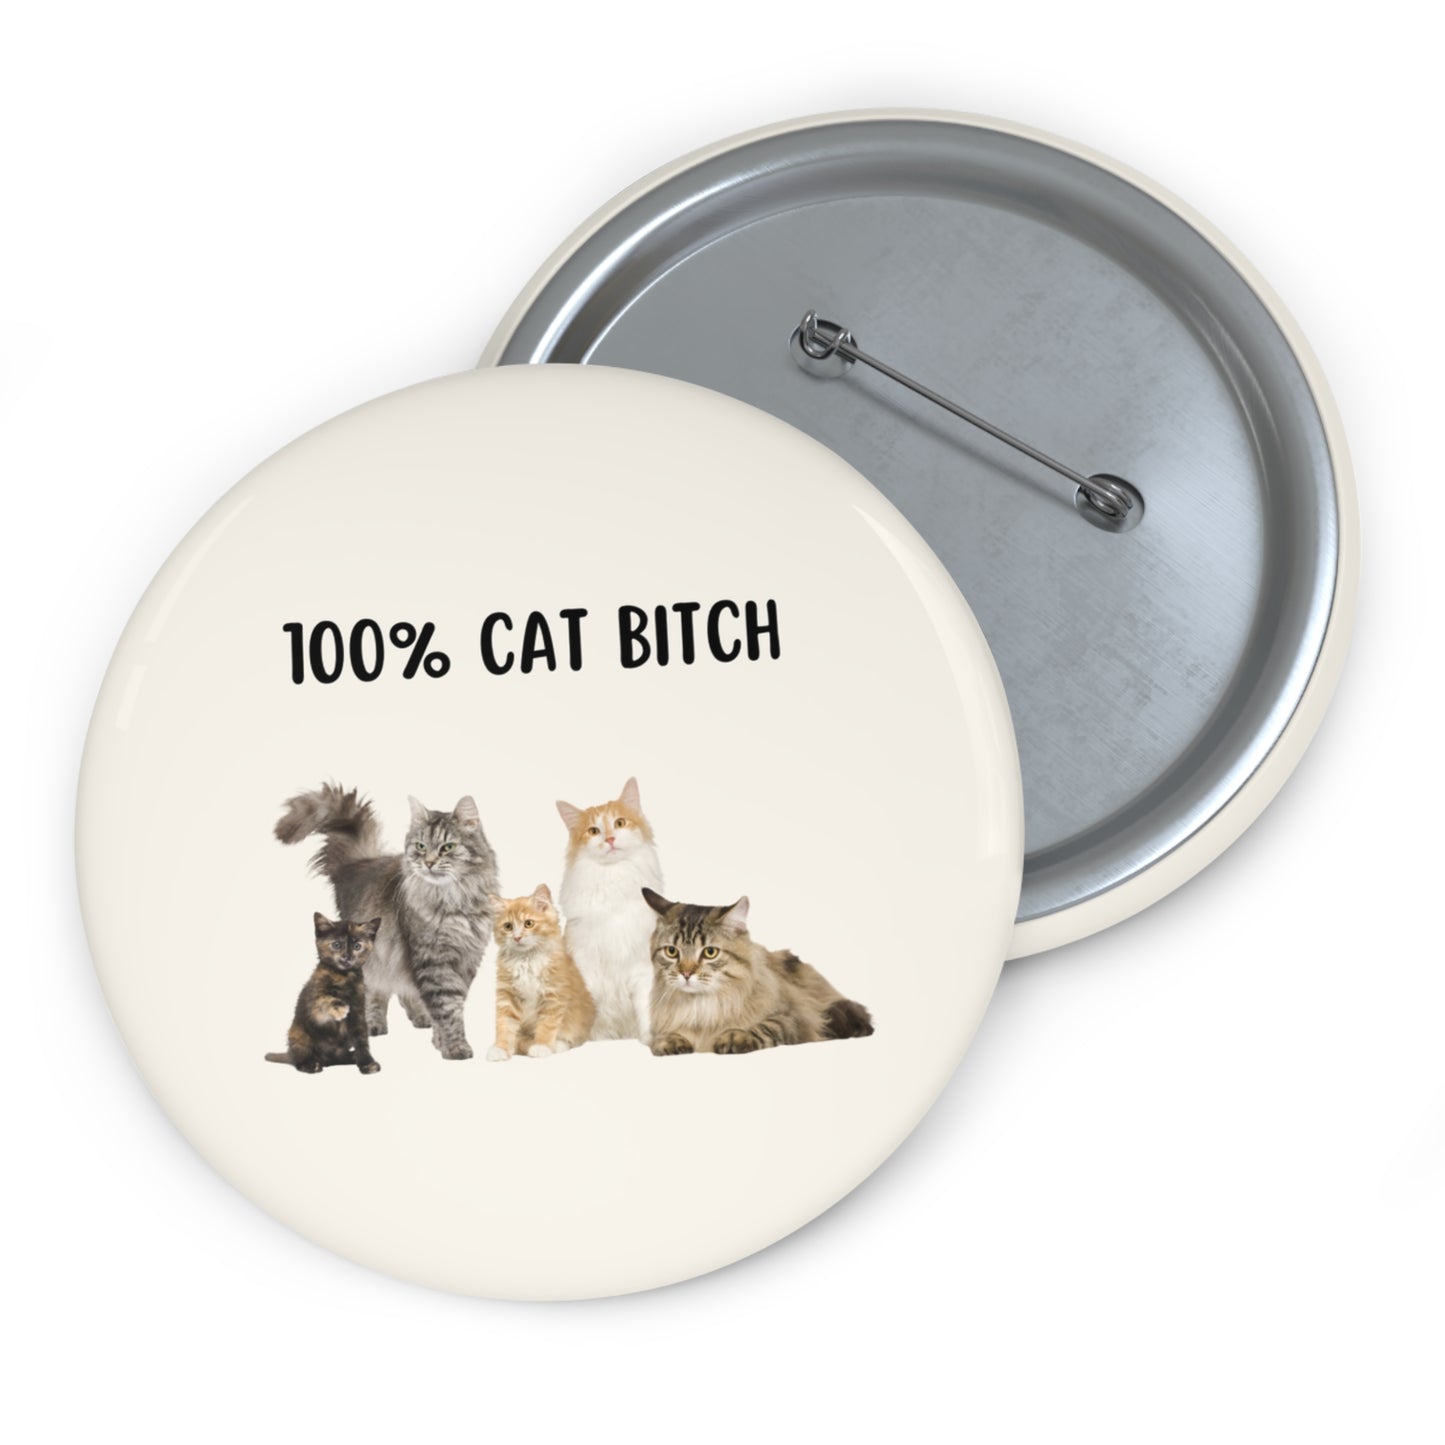 100% Cat B*tch Pin, Funny Cat Pinback Button, Funny Cat Pin Brooch Badge, Cat Mom Gift, Pin Bag Accessories